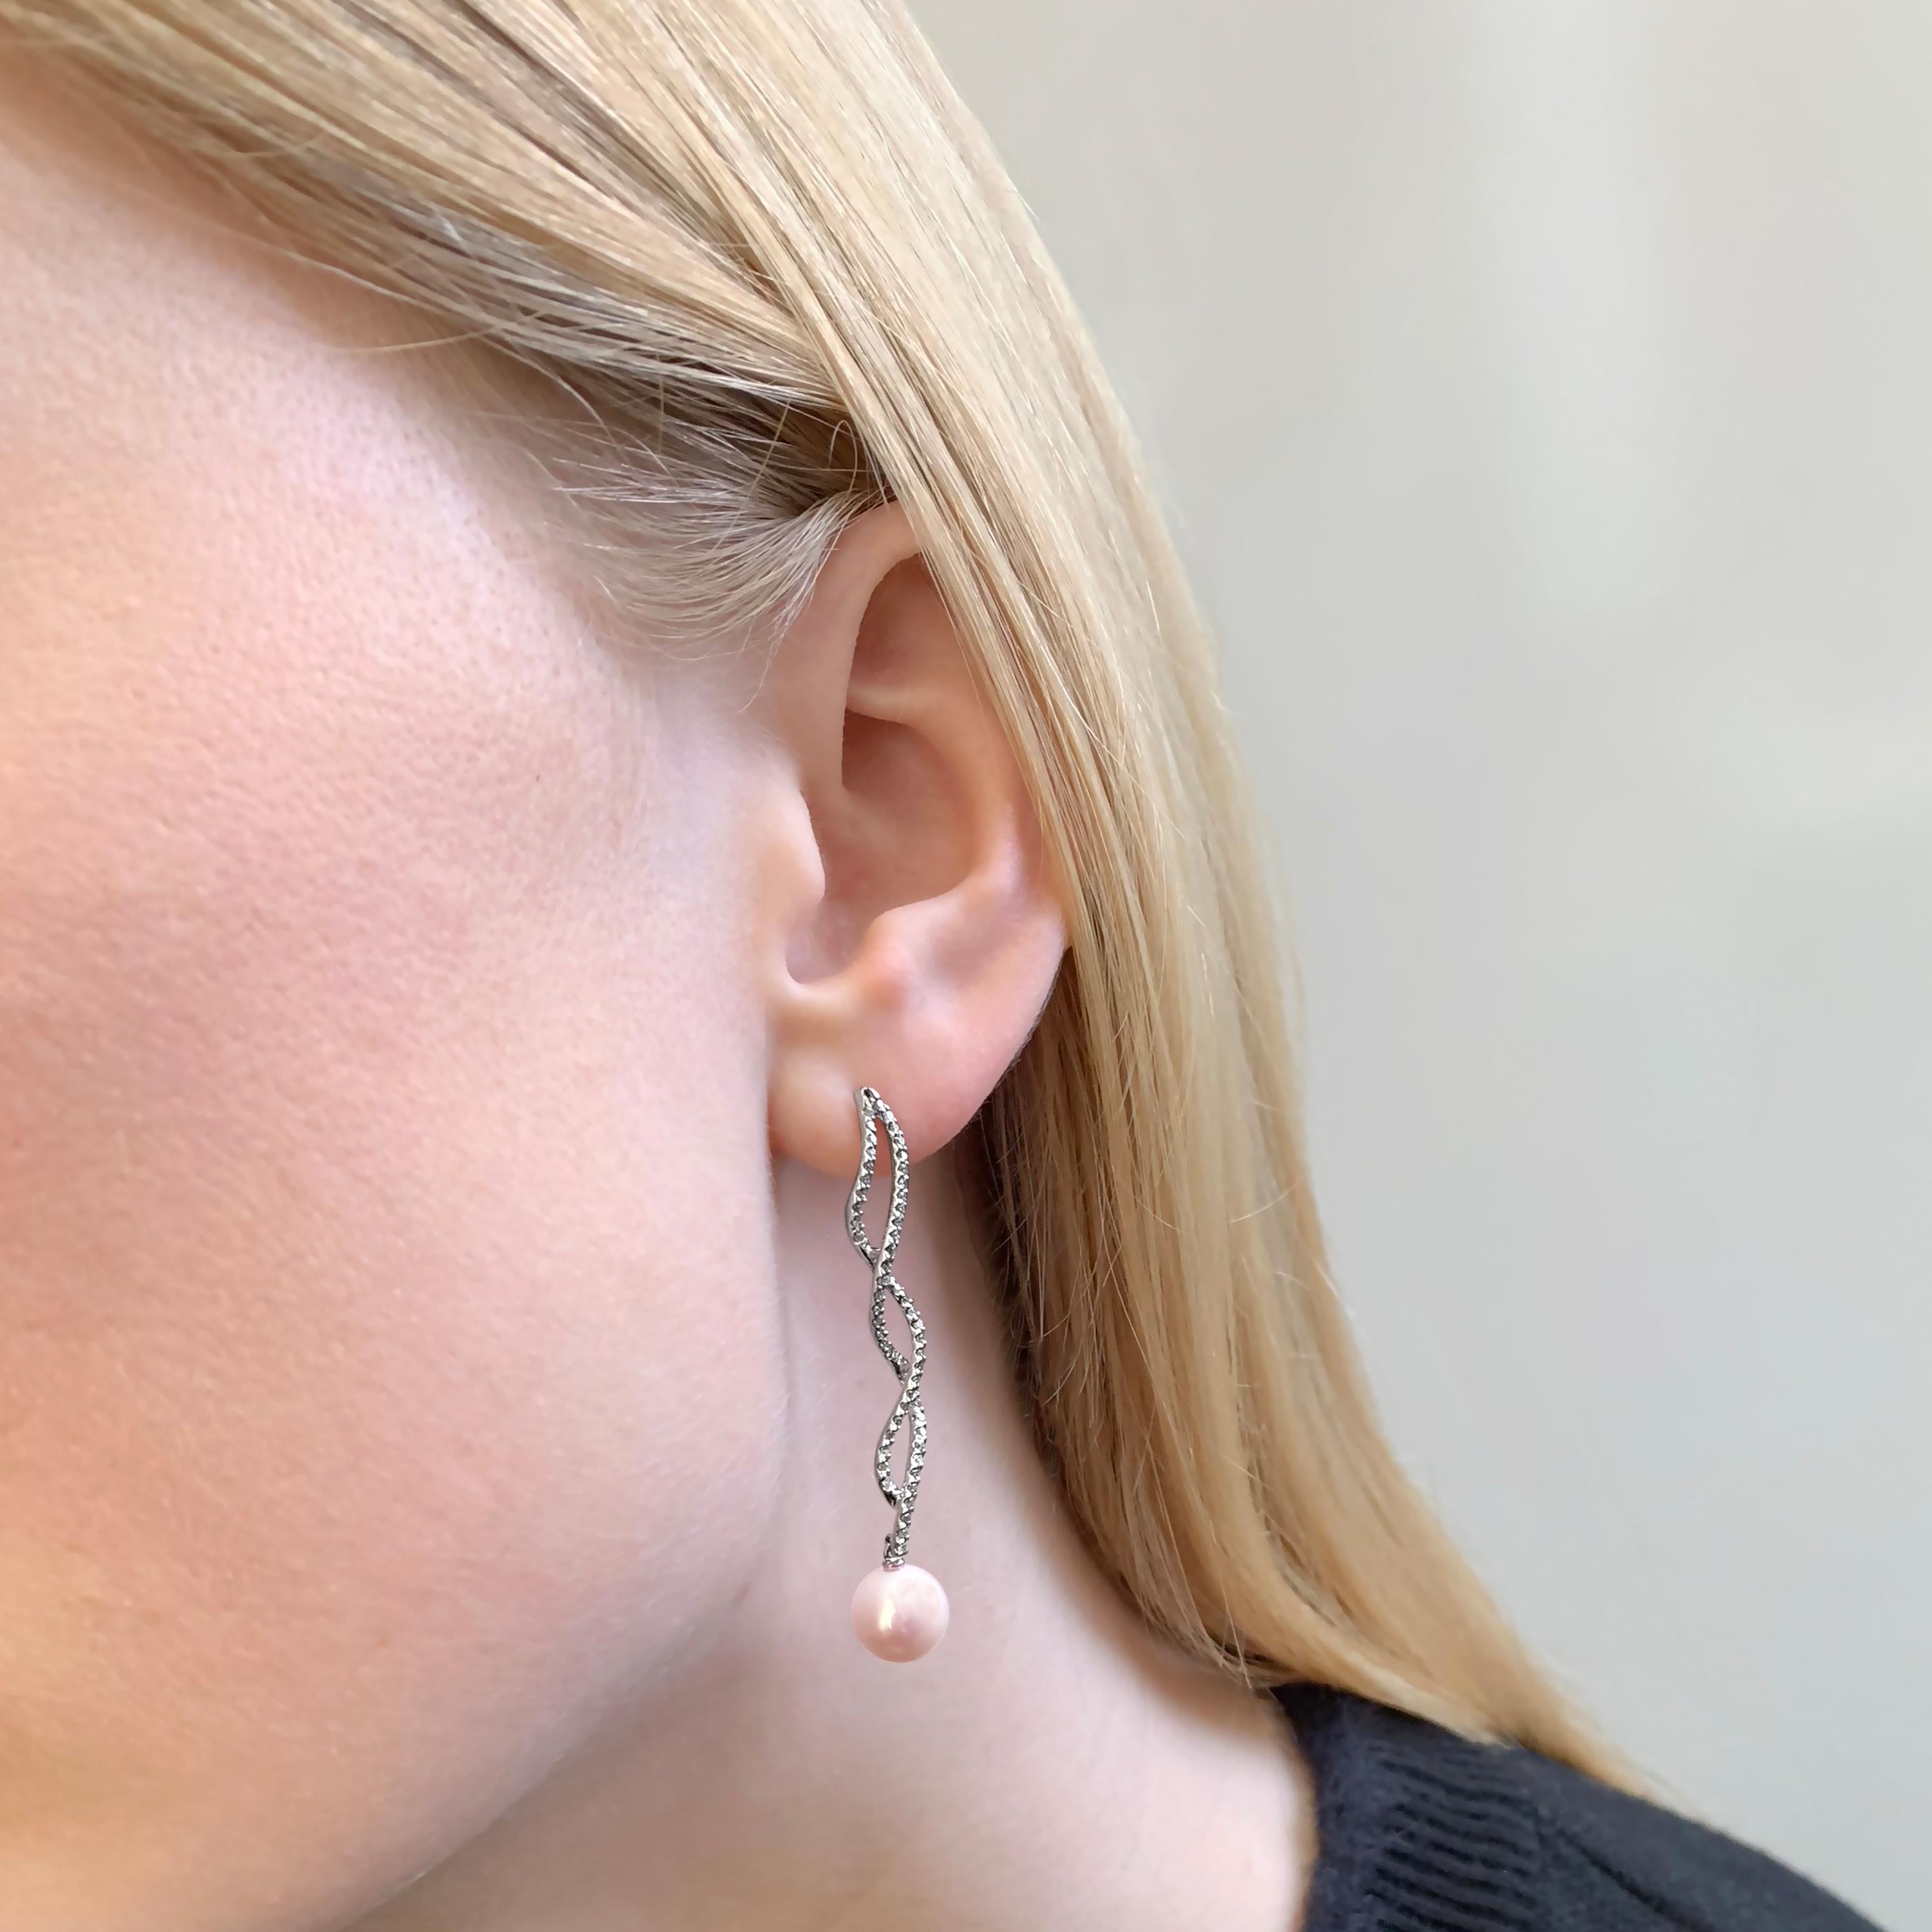 These elegant earrings by Yoko London feature Freshwater pearls beneath a delicate twist of diamonds. The 18 Karat white gold setting perfectly enriches the lustre of the pearl and the bright sparkle of the diamonds. The length of these earrings